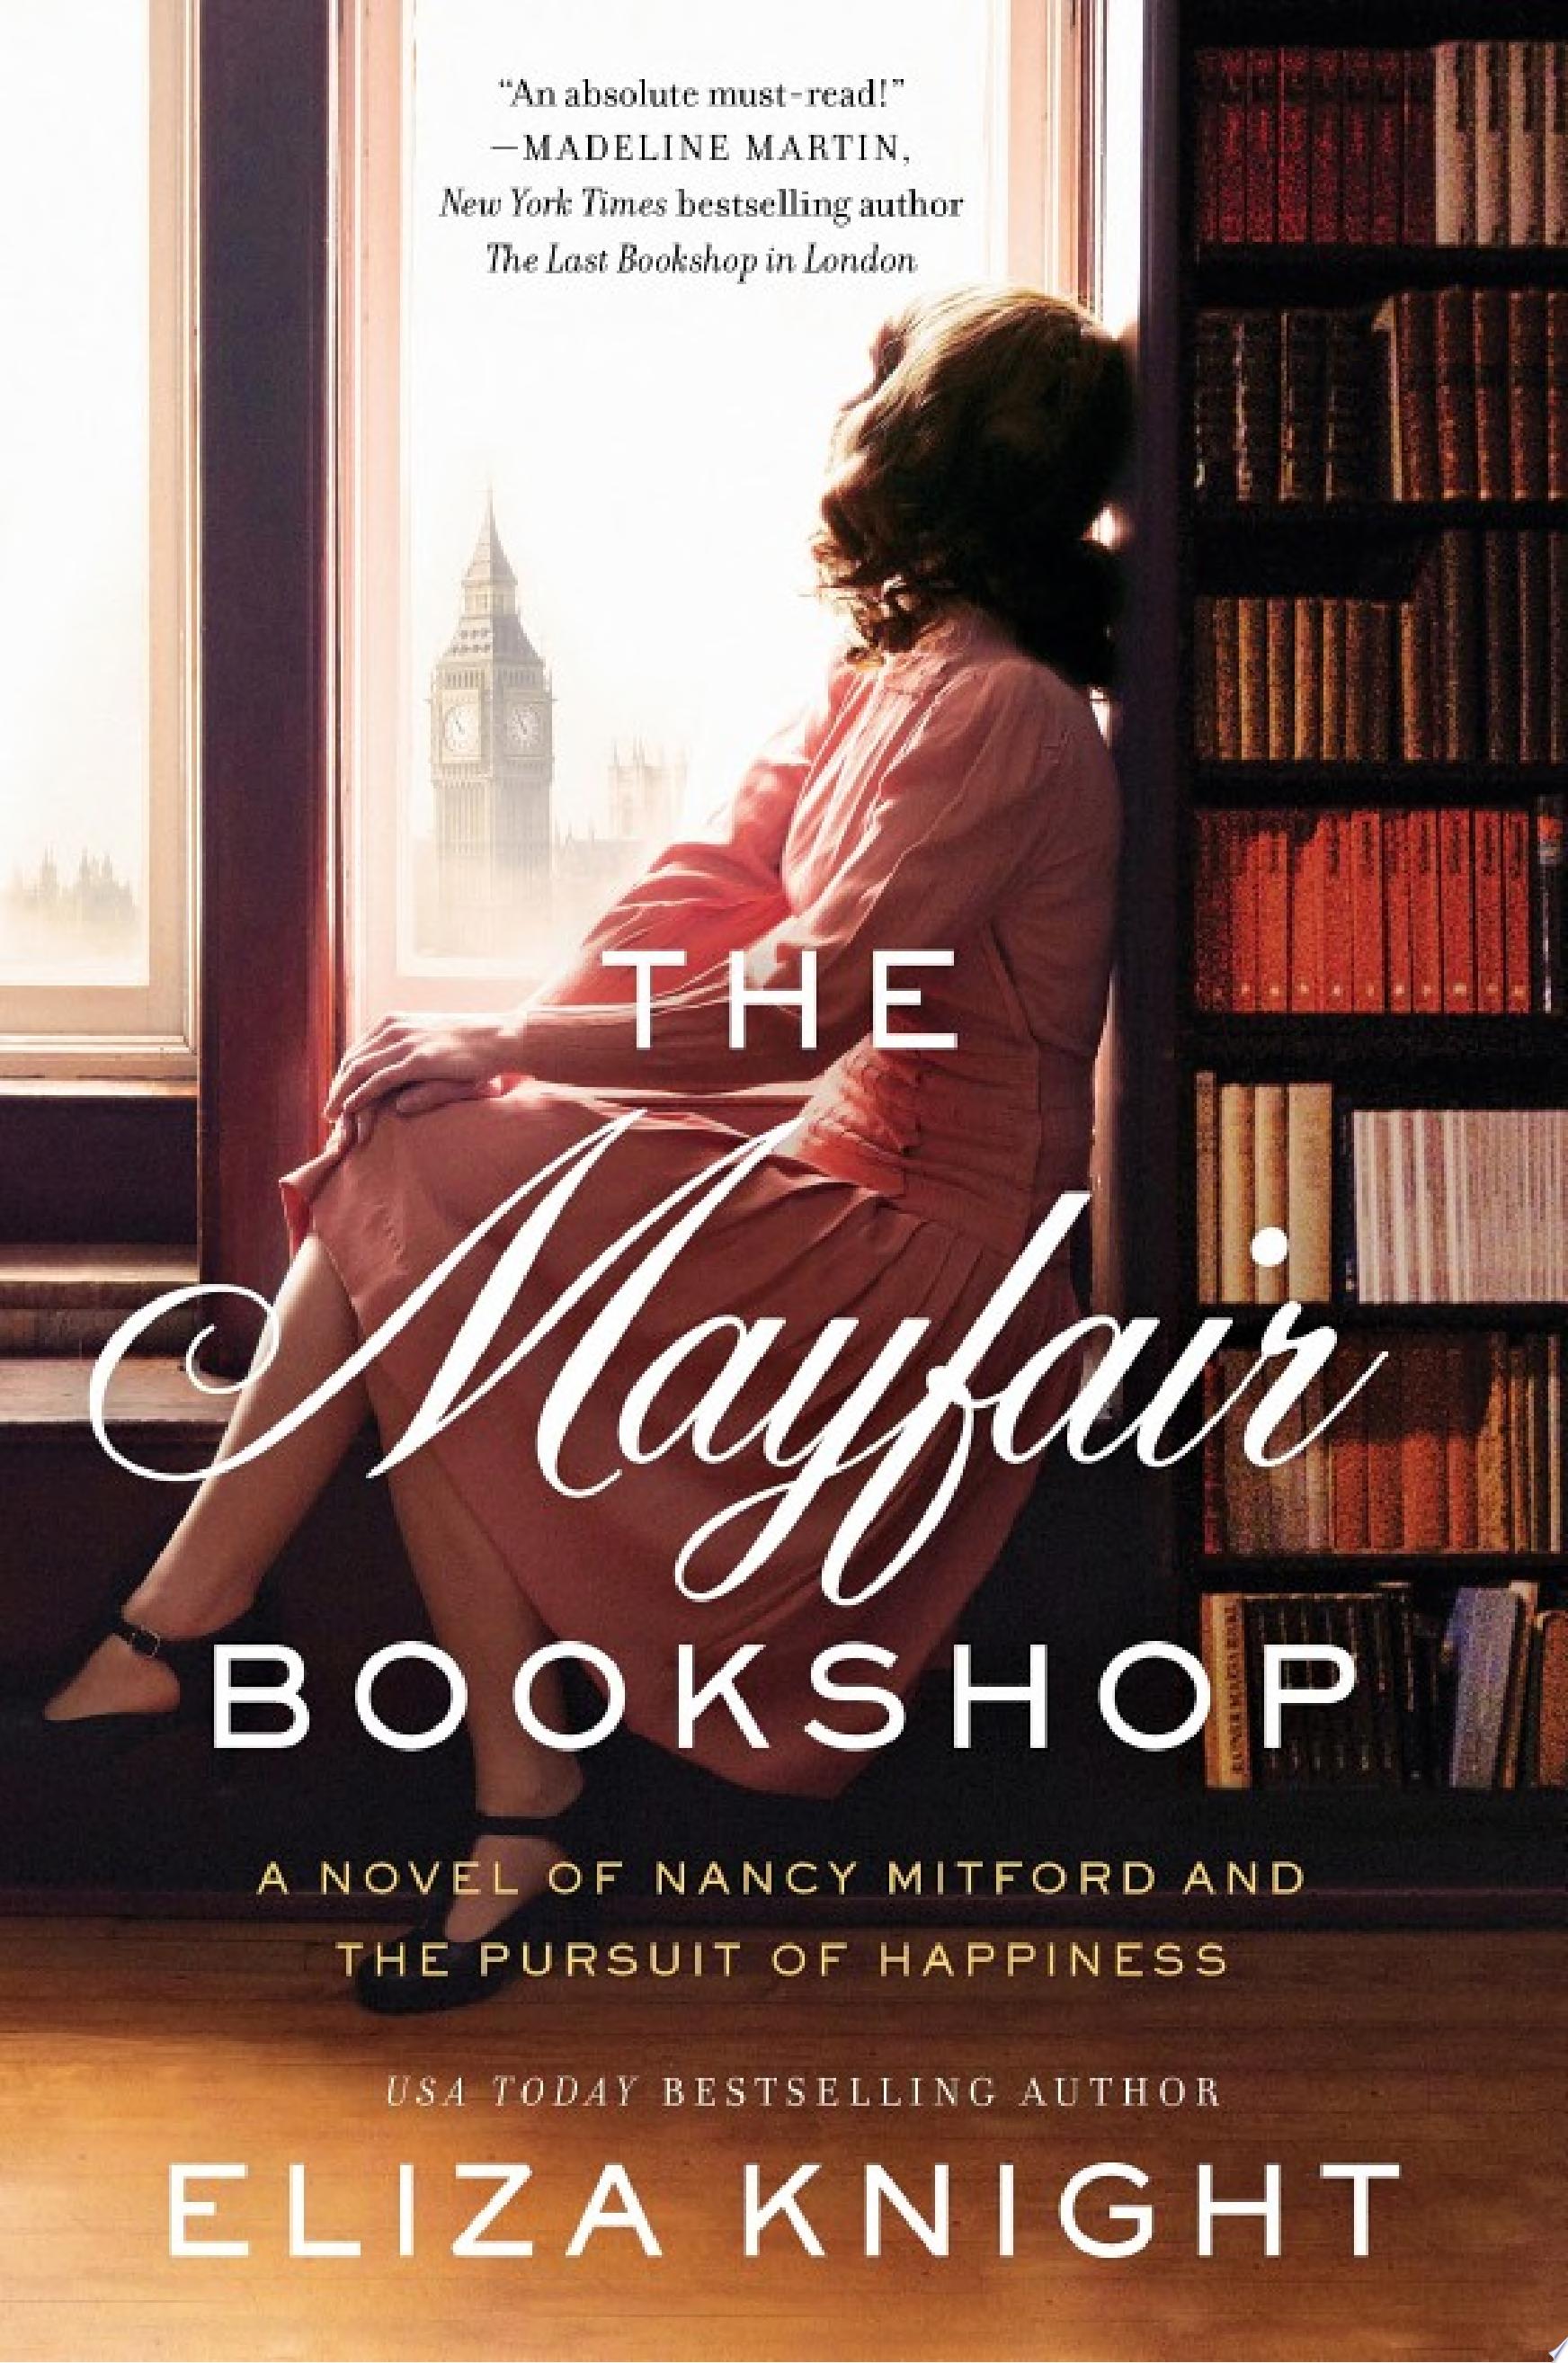 Image for "The Mayfair Bookshop"